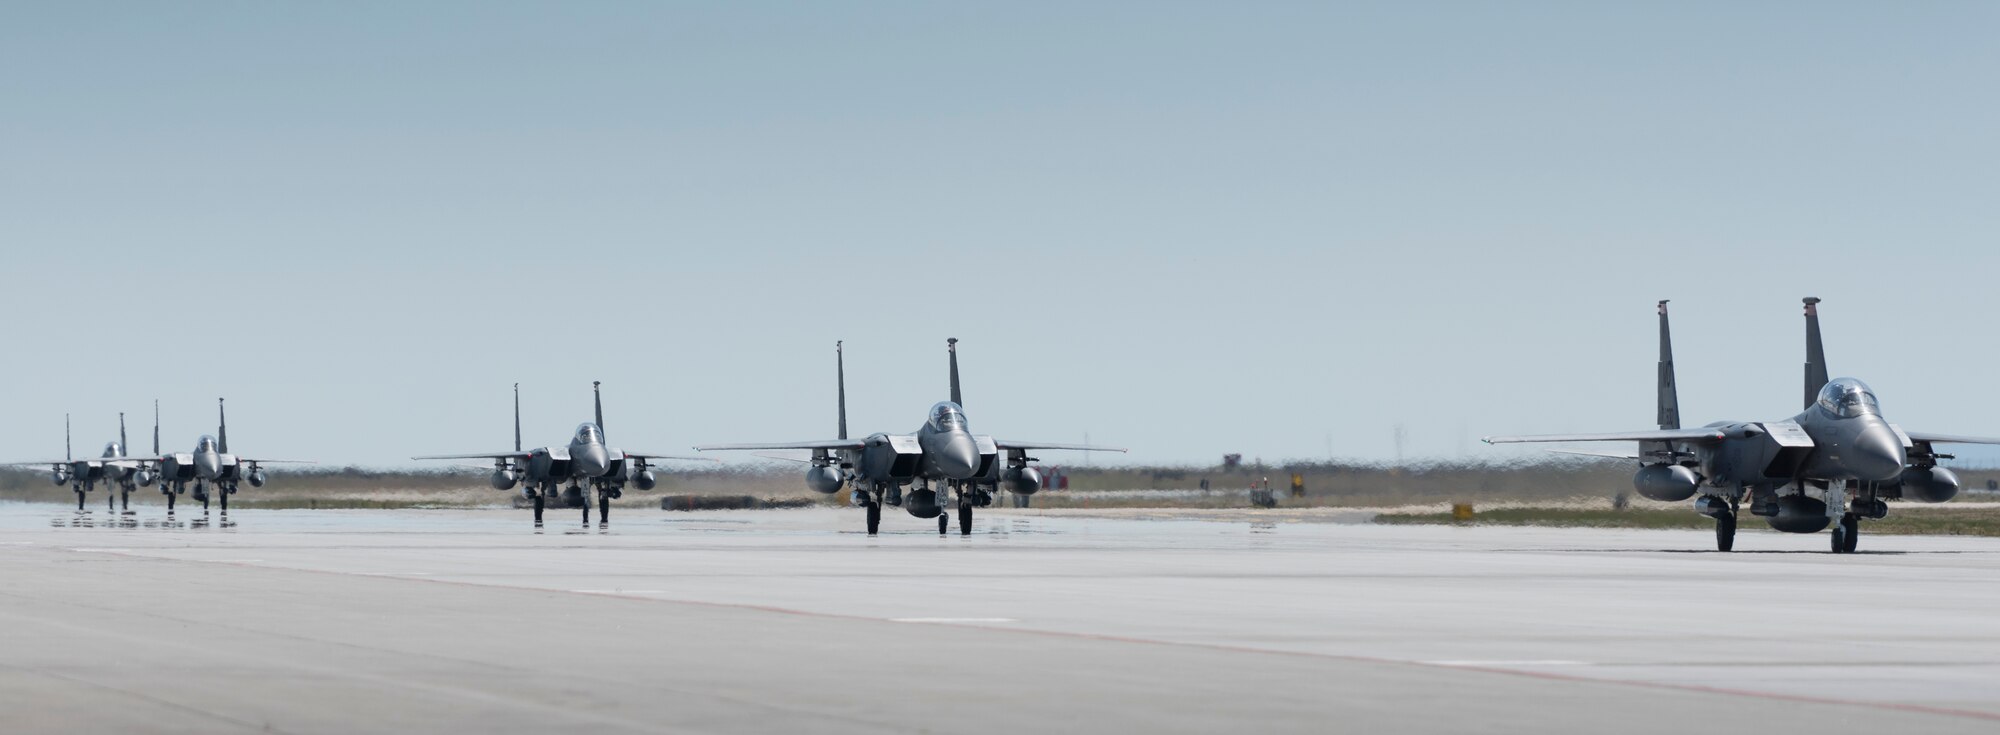 F-15E Strike Eagles taxi after returning from Southwest Asia to Mountain Home Air Force Base, Idaho, April 17, 2016. Airmen spent six months deployed in support of Operation Inherent Resolve. (U.S. Air Force photo by Airman Alaysia Berry/Released)